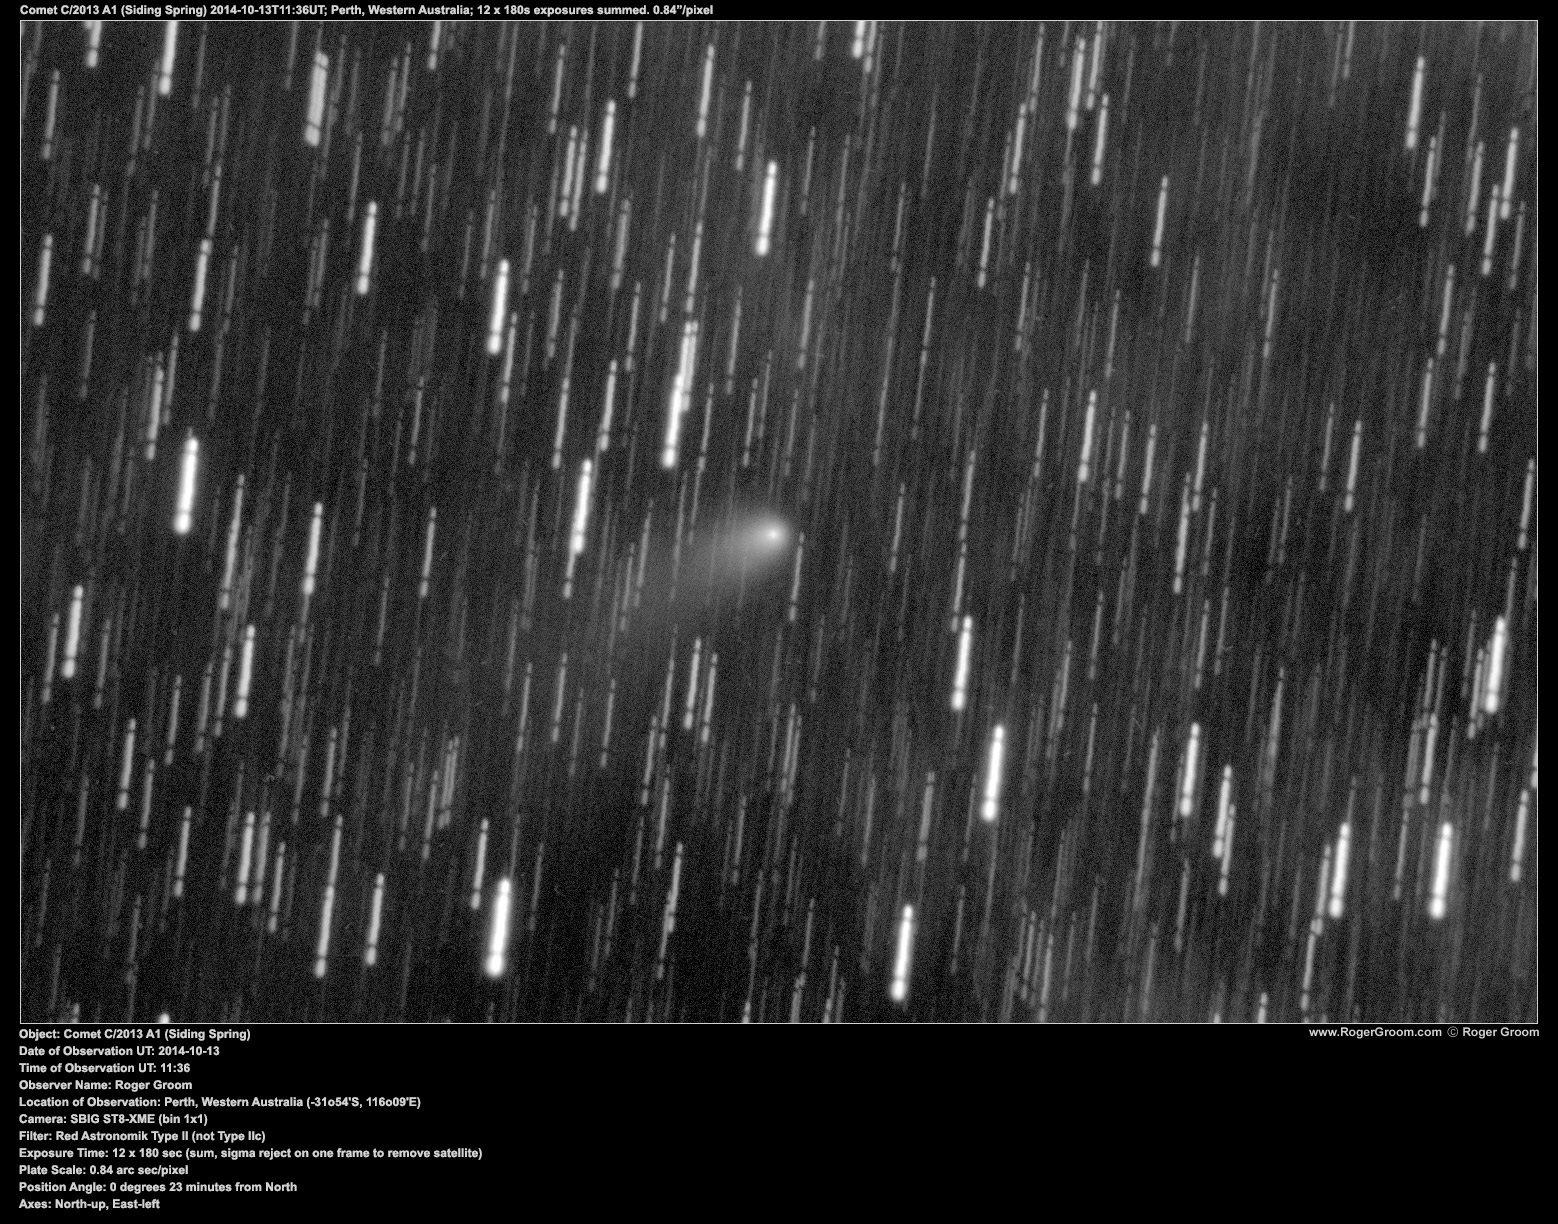 Object: Comet C/2013 A1 (Siding Spring) Date of Observation UT: 2014-10-13 Time of Observation UT: 11:36 Observer Name: Roger Groom Location of Observation: Perth, Western Australia (-31o54'S, 116o09'E) Camera: SBIG ST8-XME (bin 1x1) Filter: Red Astronomik Type II (not Type IIc) Exposure Time: 12 x 180 sec (sum, sigma reject on one frame to remove satellite) Plate Scale: 0.84 arc sec/pixel Position Angle: 0 degrees 23 minutes from North Axes: North-up, East-left